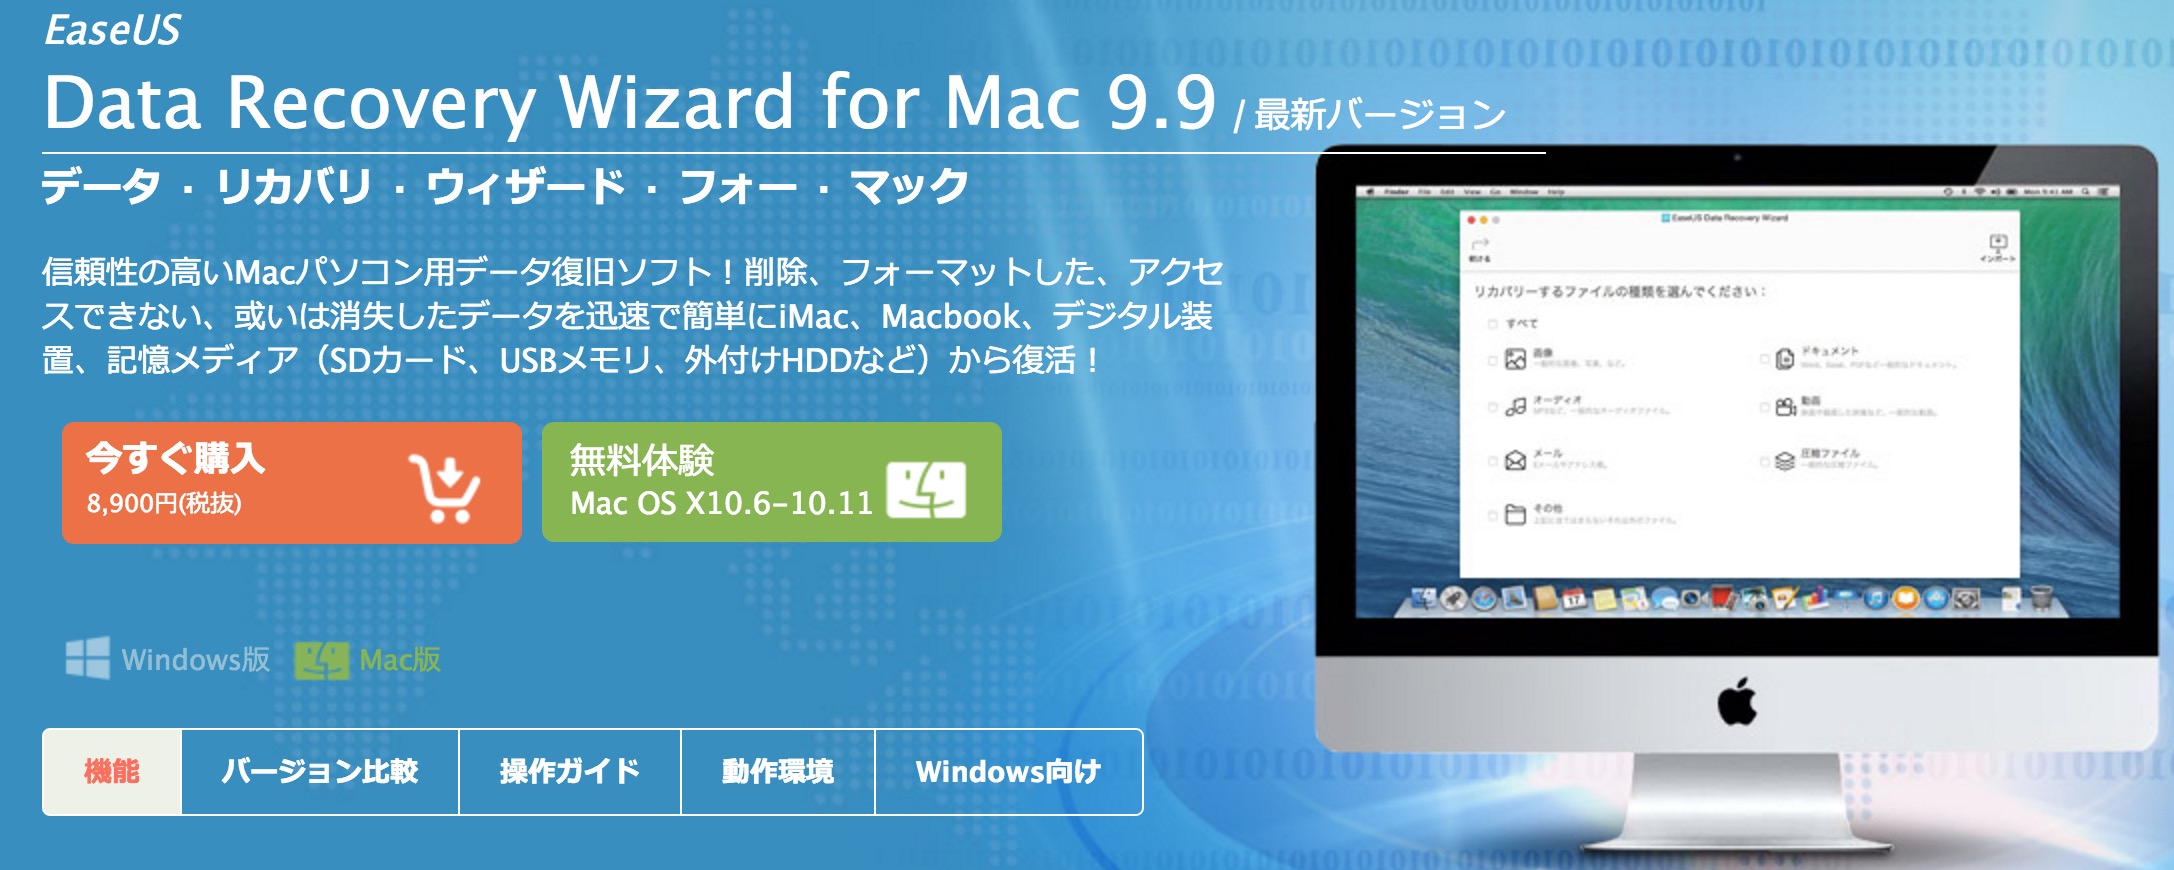 Date Recovery Wizerard for Macの解説1